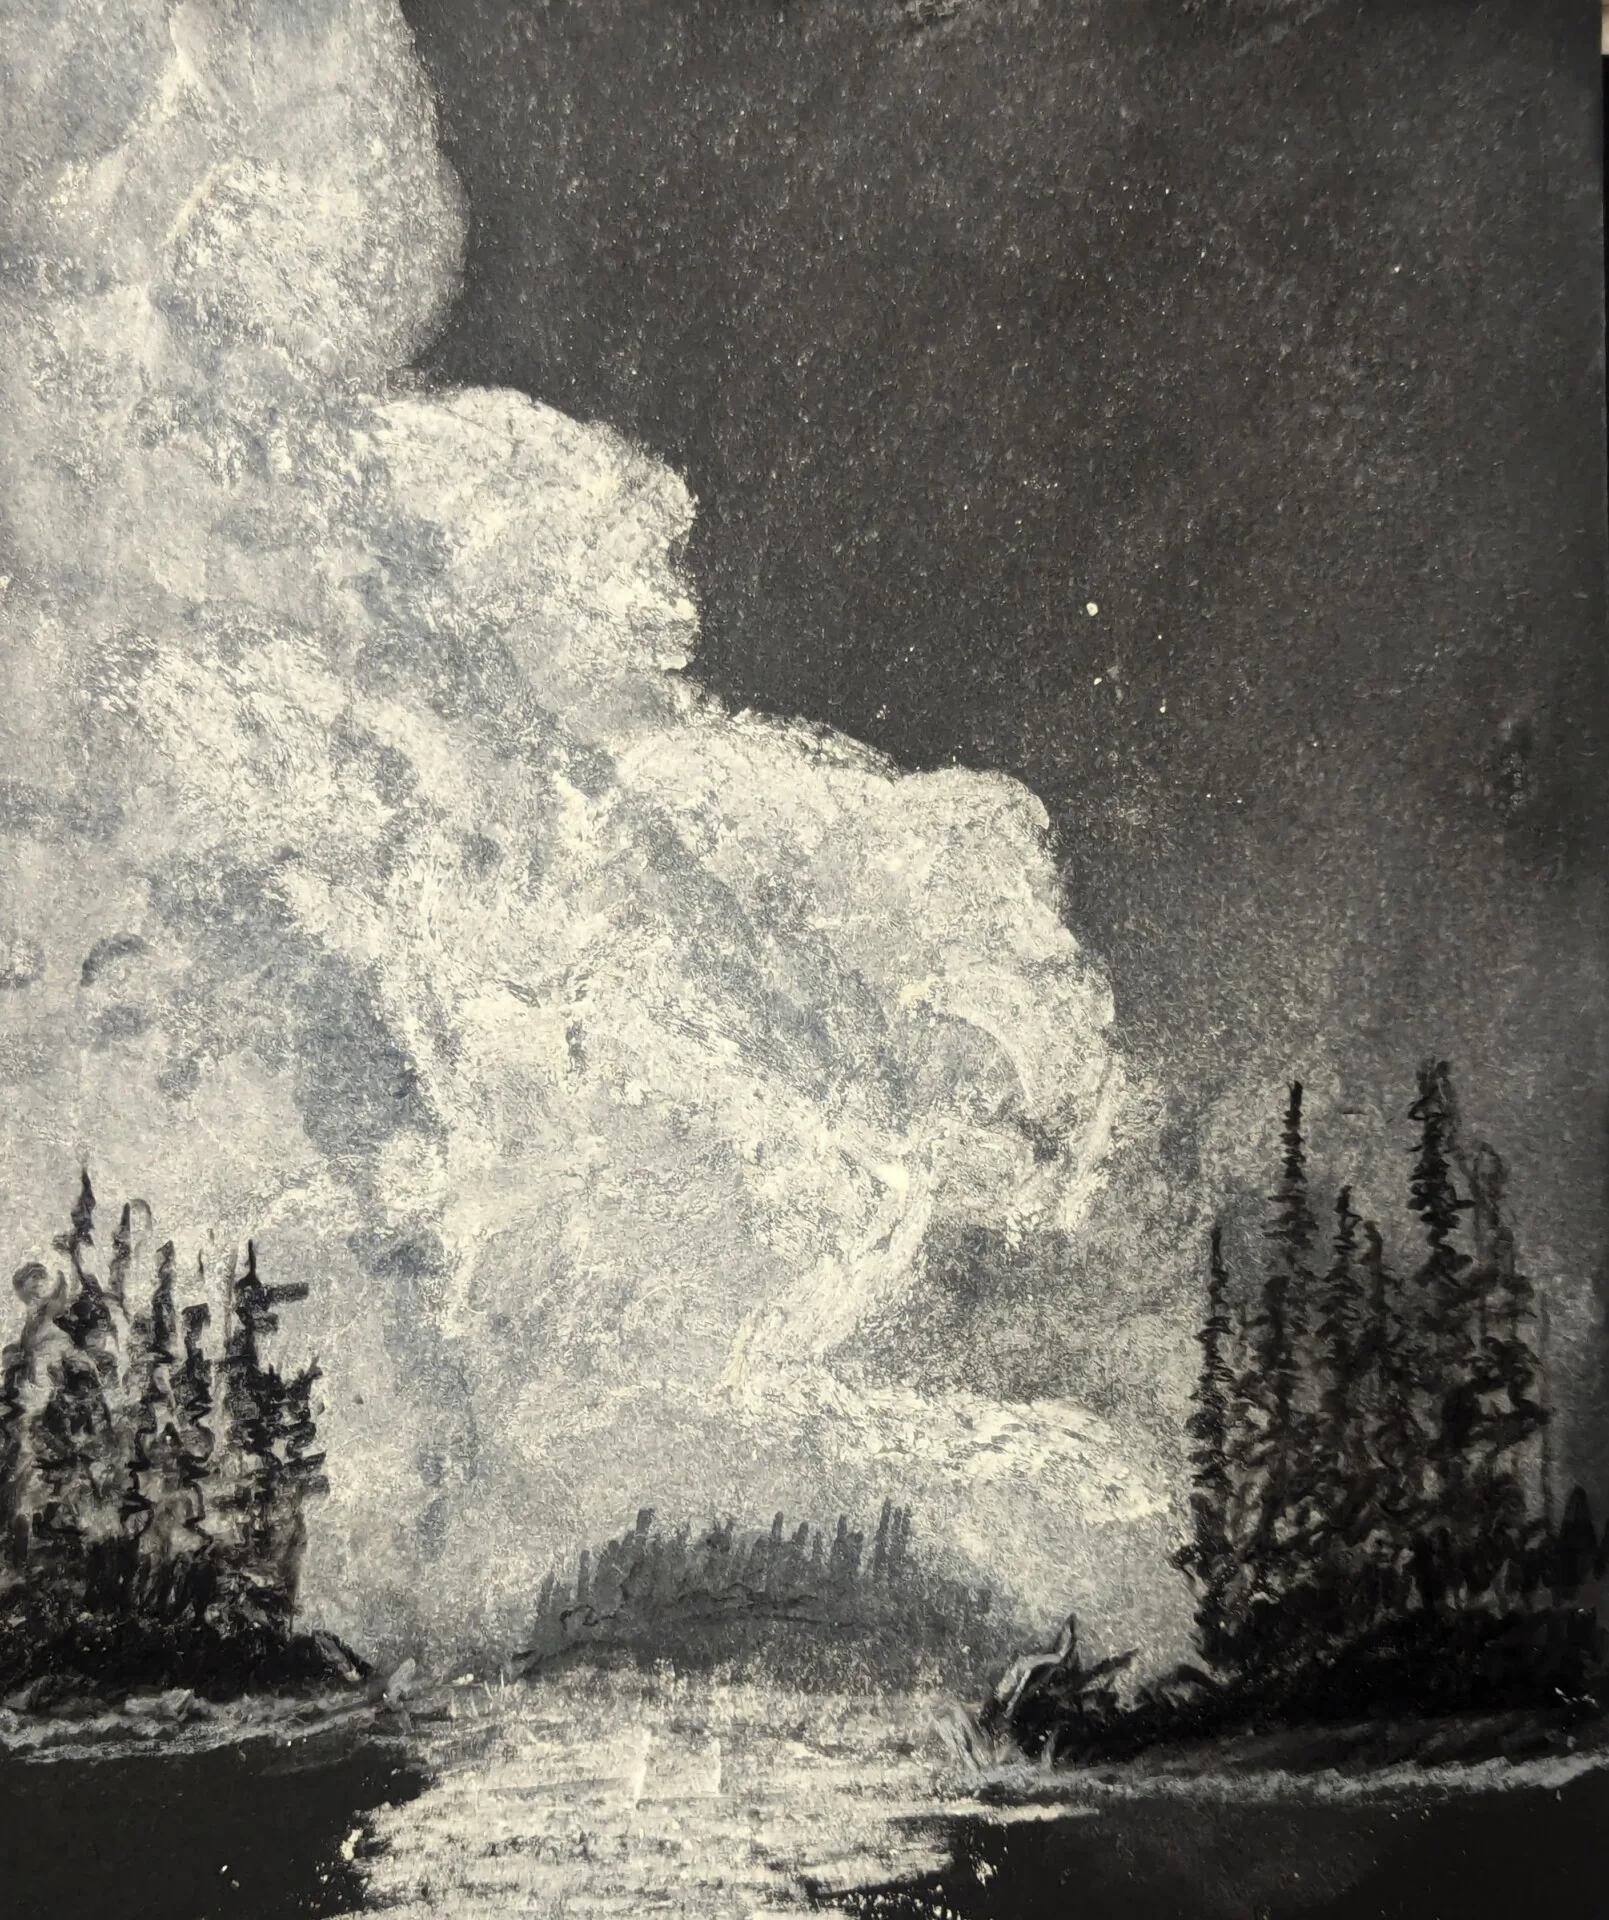 Acadia On My Mind White Charcoal On A 4 Size Black Paper By John Atkinson